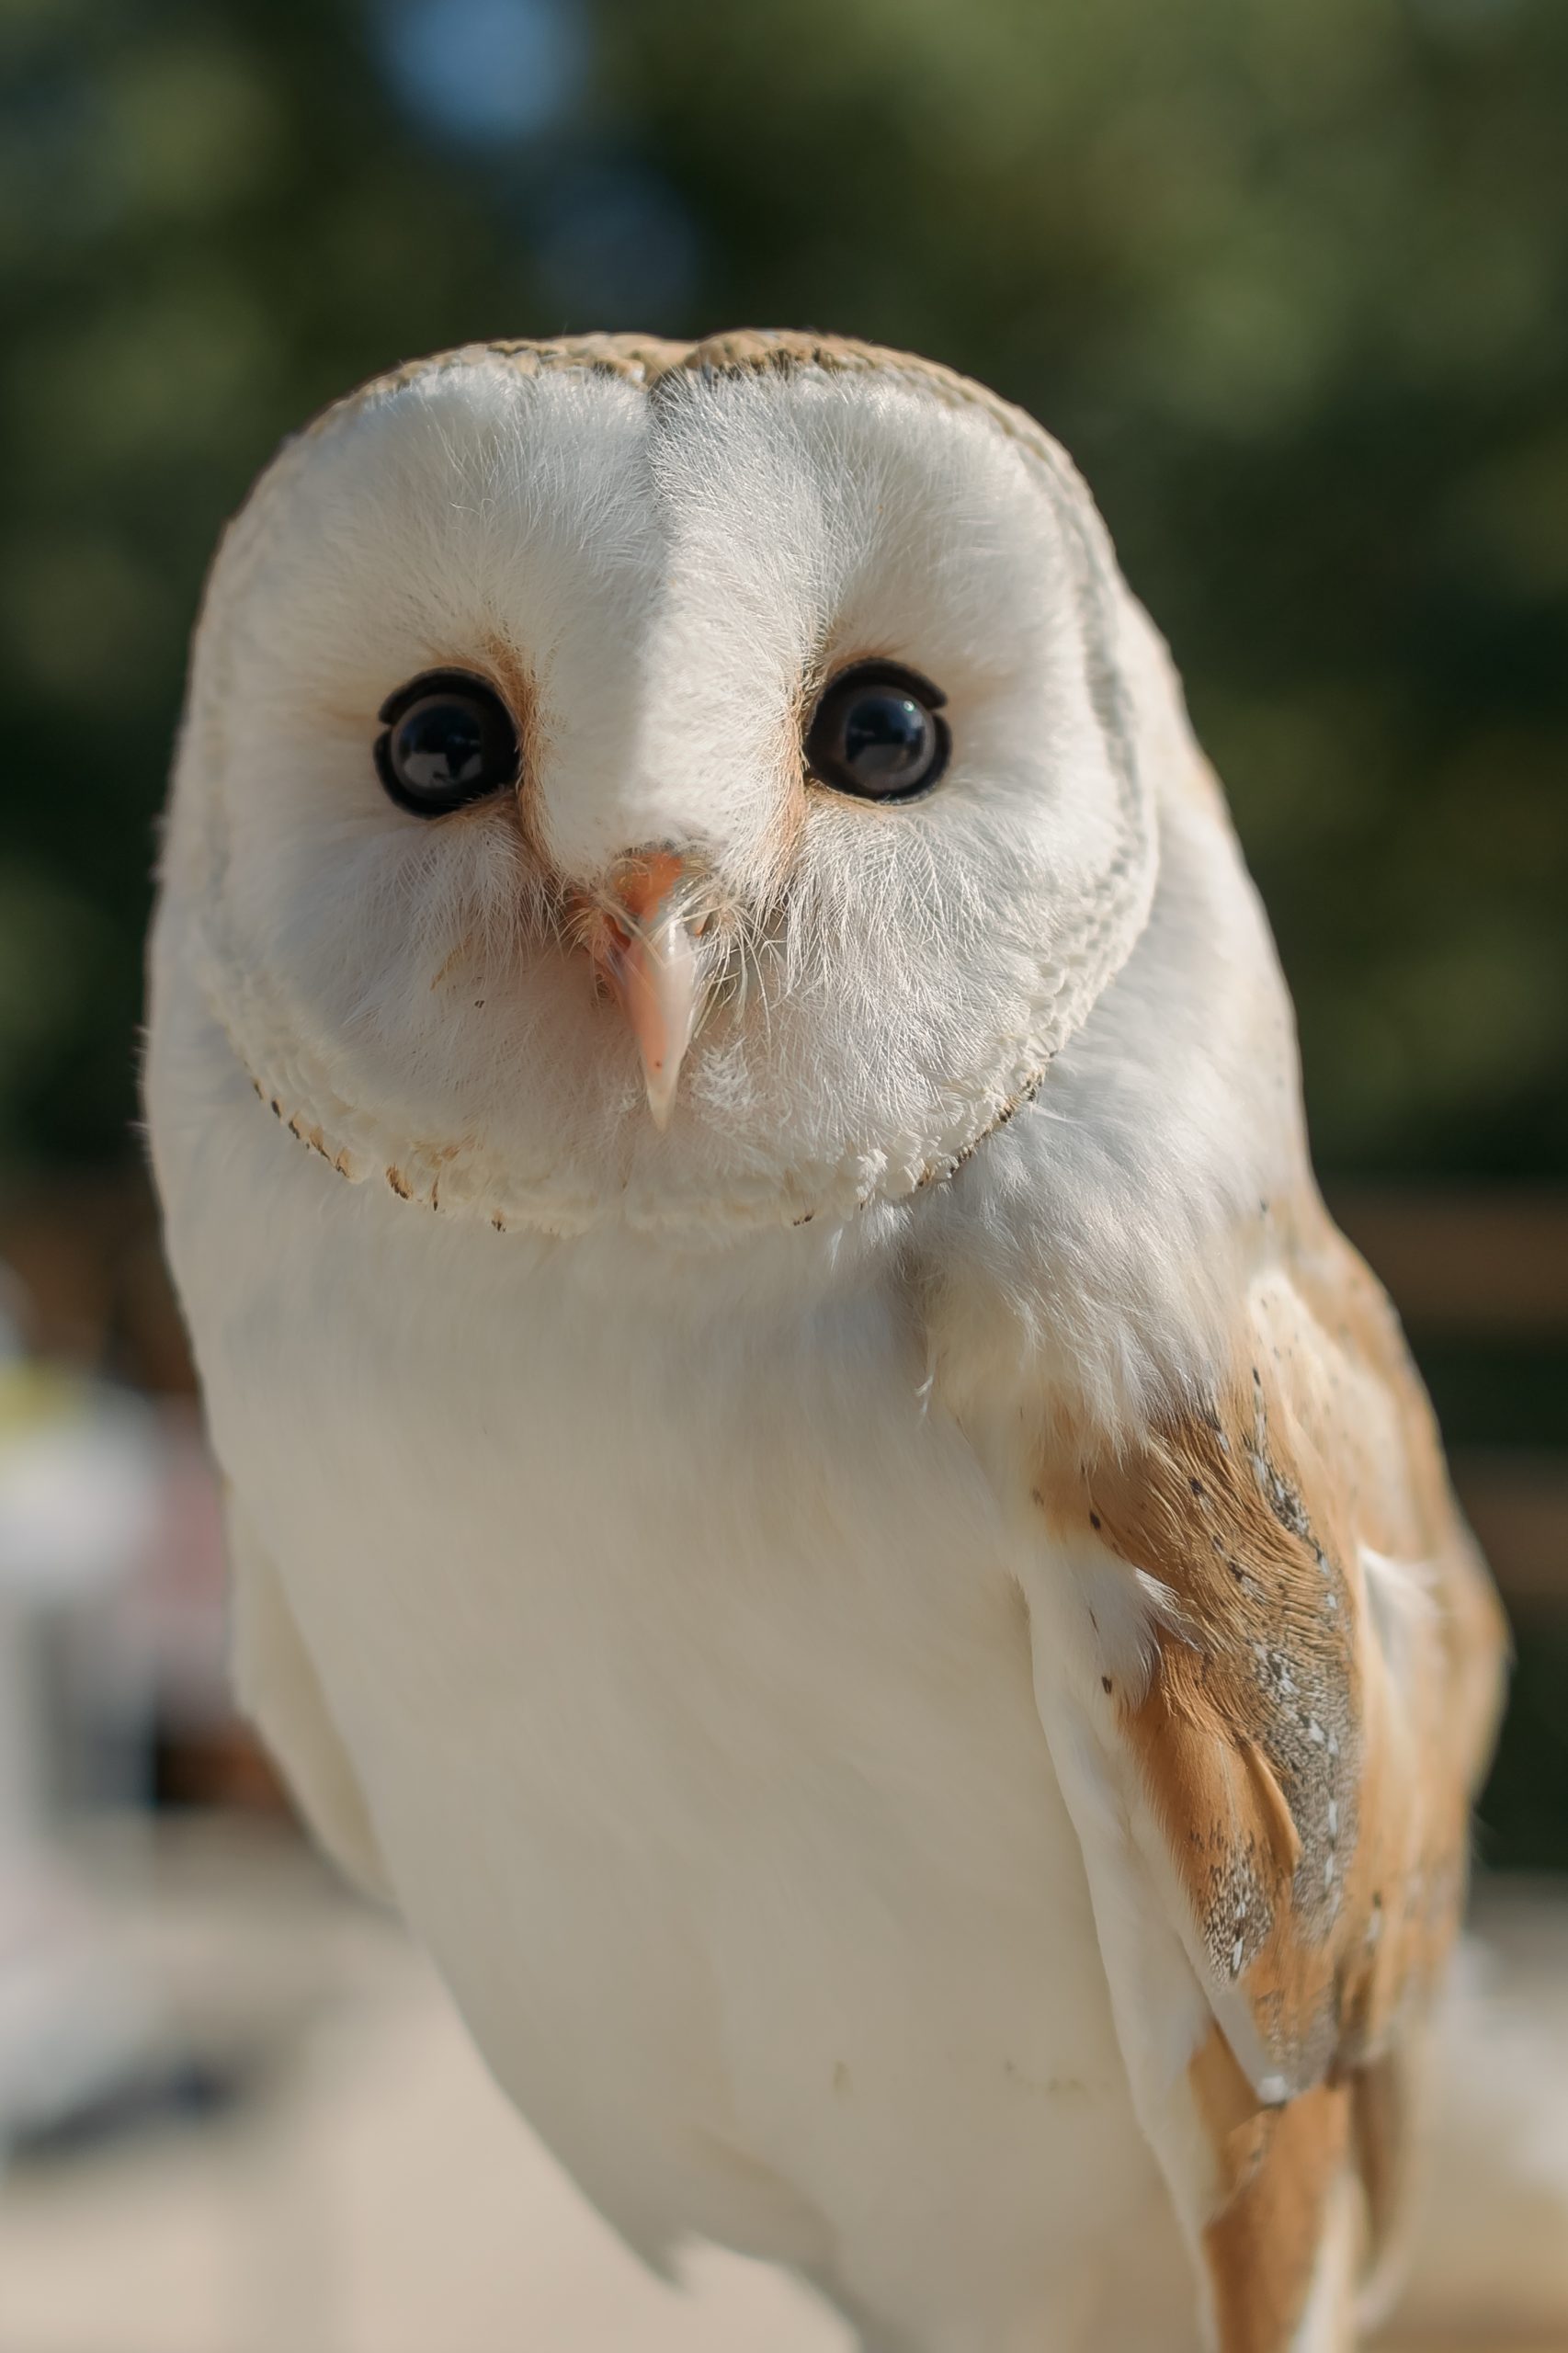 5 Interesting Facts About Barn Owls